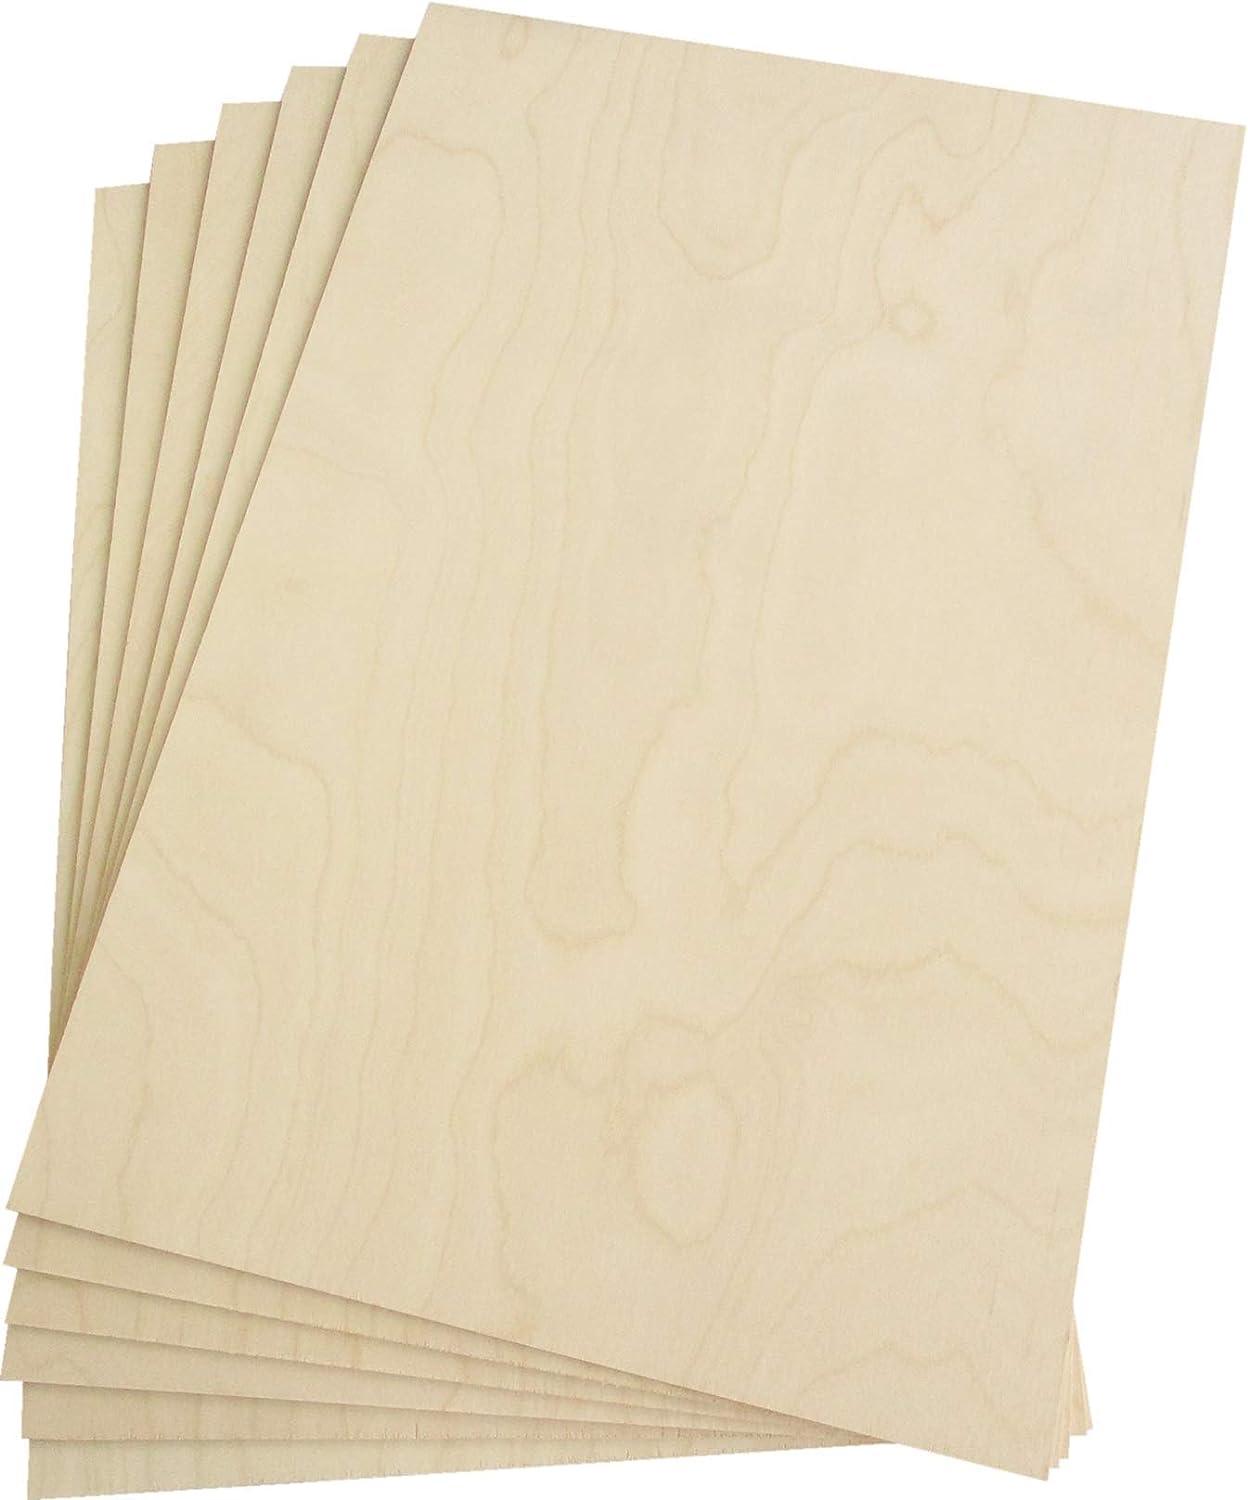 3mm, 1/8 x 8 x 8 Unfinished Baltic Birch plywood sheets